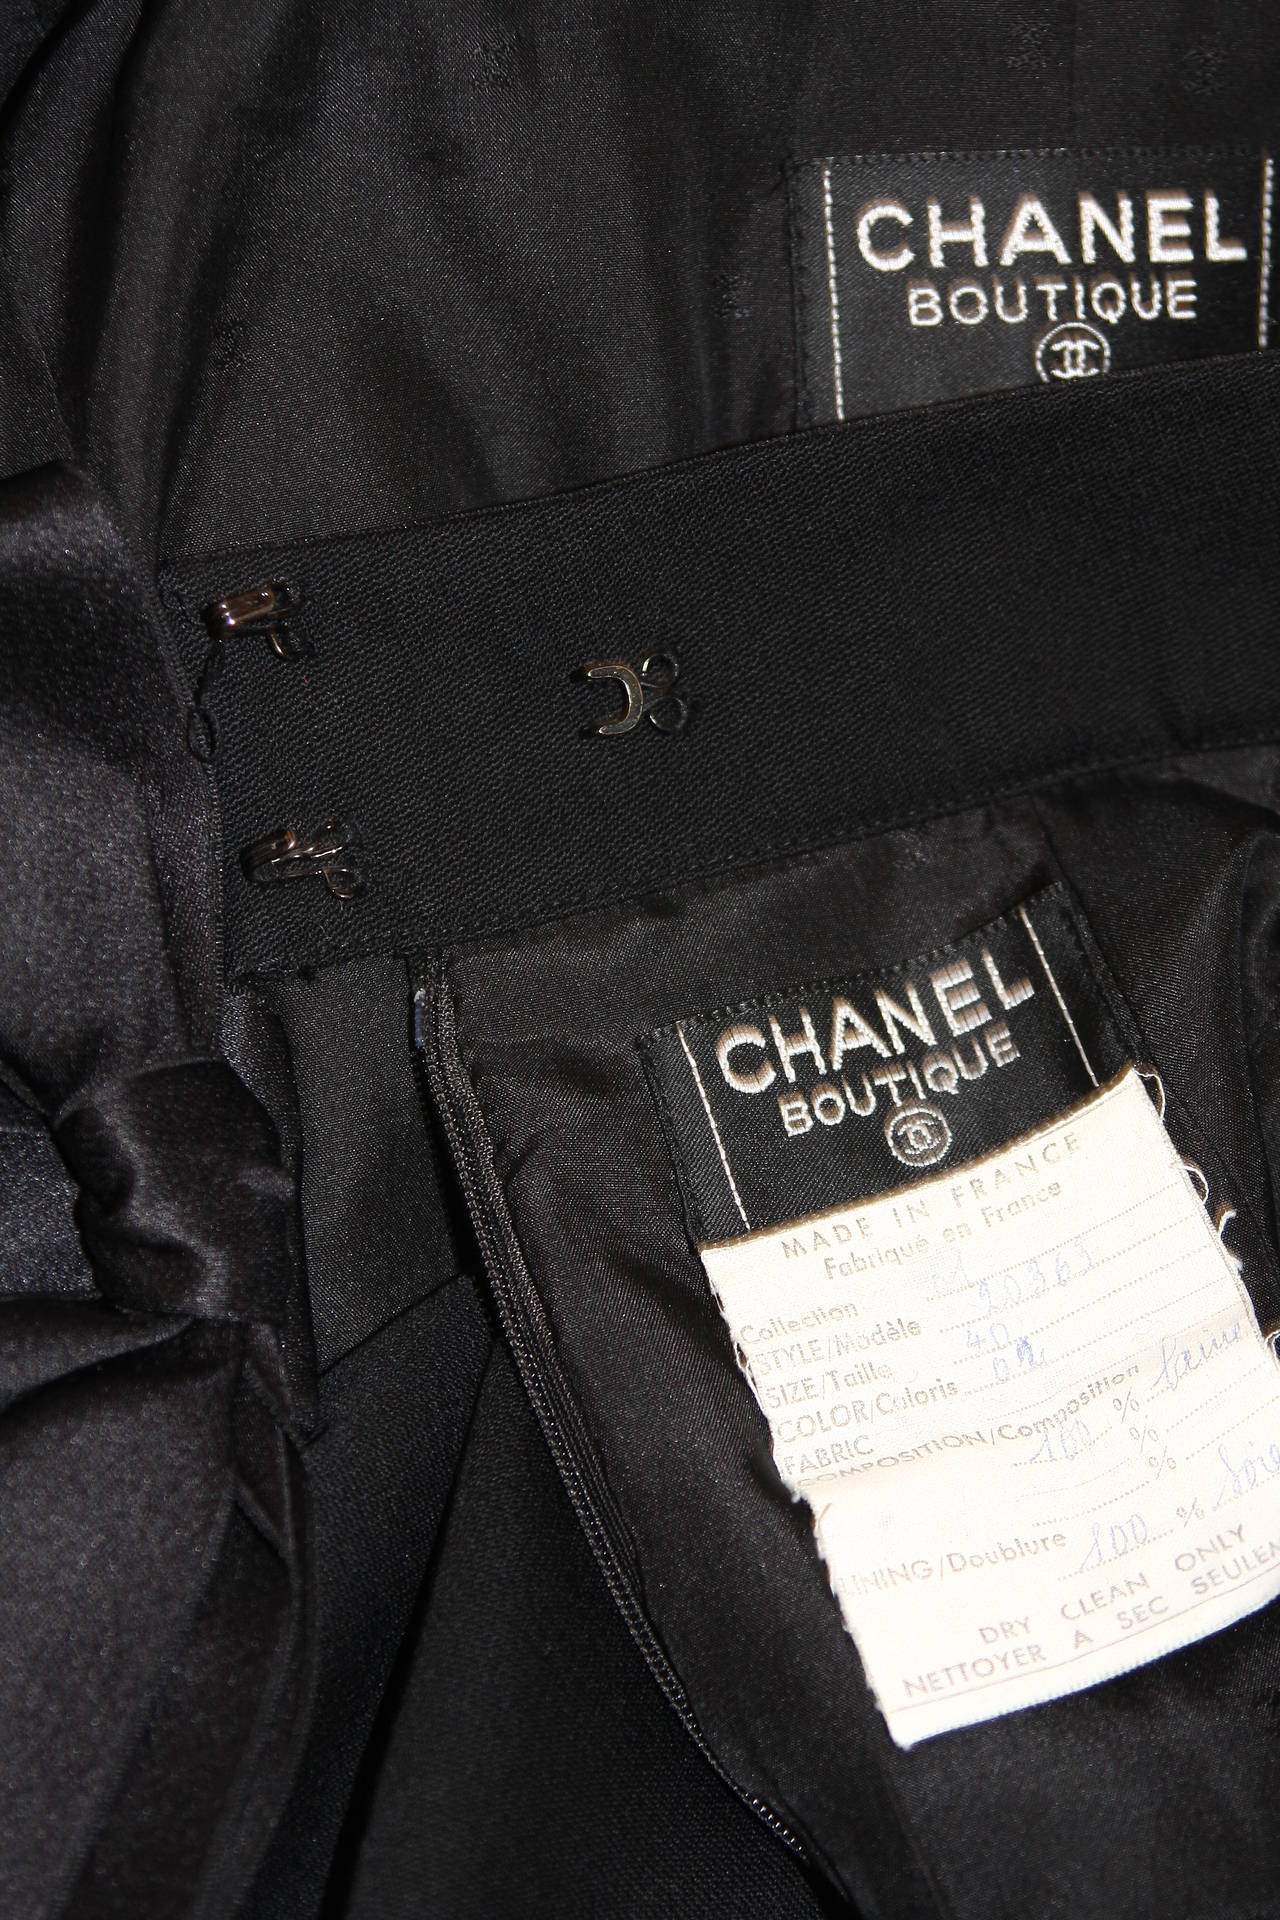 2001 Chanel Black wool with Silk Ribbon Sash & Bow Jacket & Skirt Suit For Sale 3